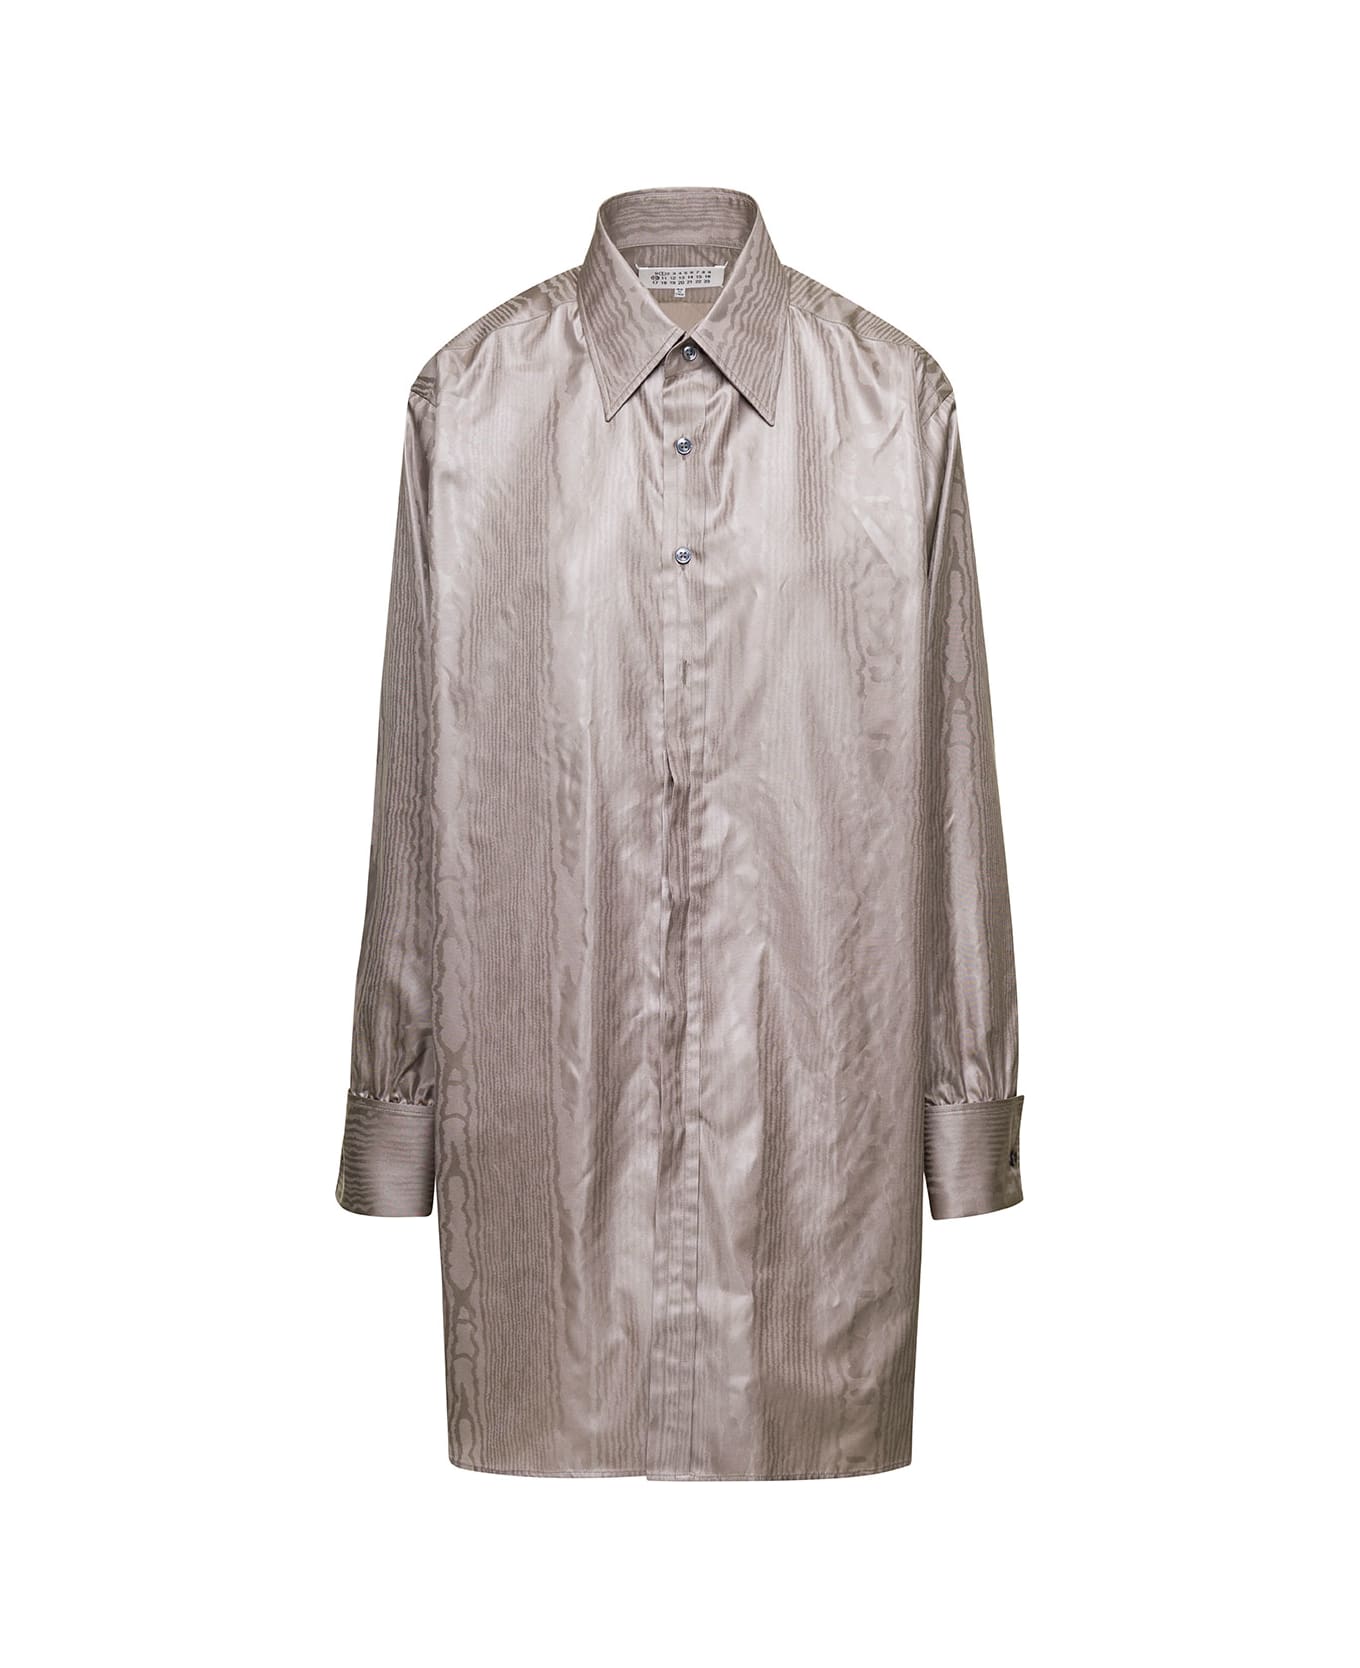 Maison Margiela Beige Oversze Poly Moire Shirt In Polyester Woman - Beige シャツ